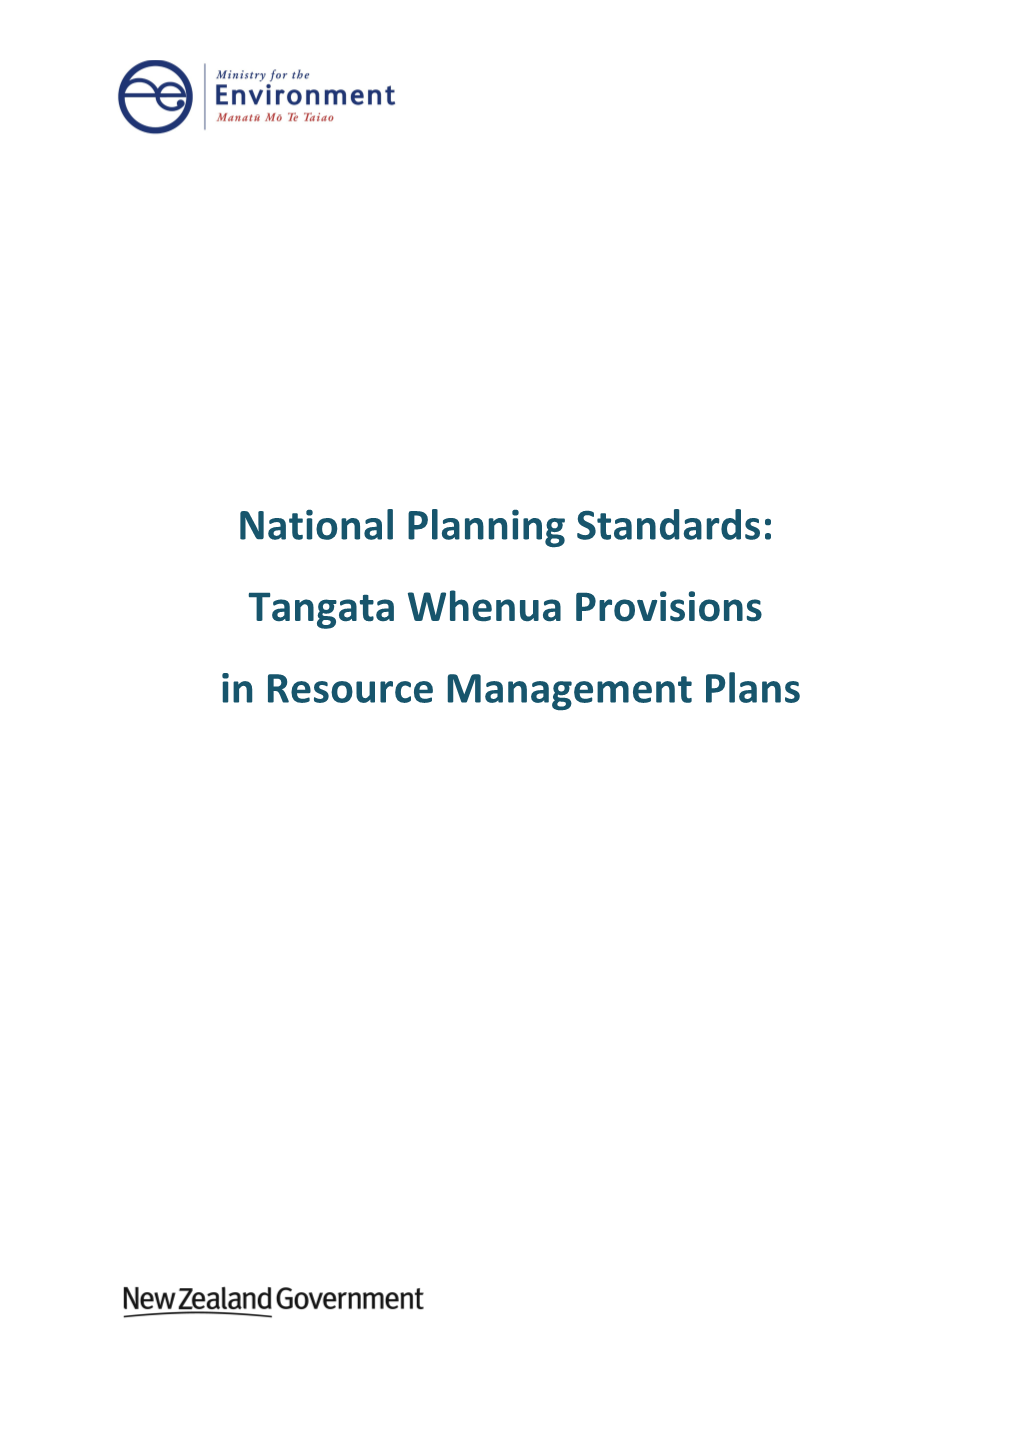 National Planning Standards: Tangata Whenua Provisions in Resource Management Plans